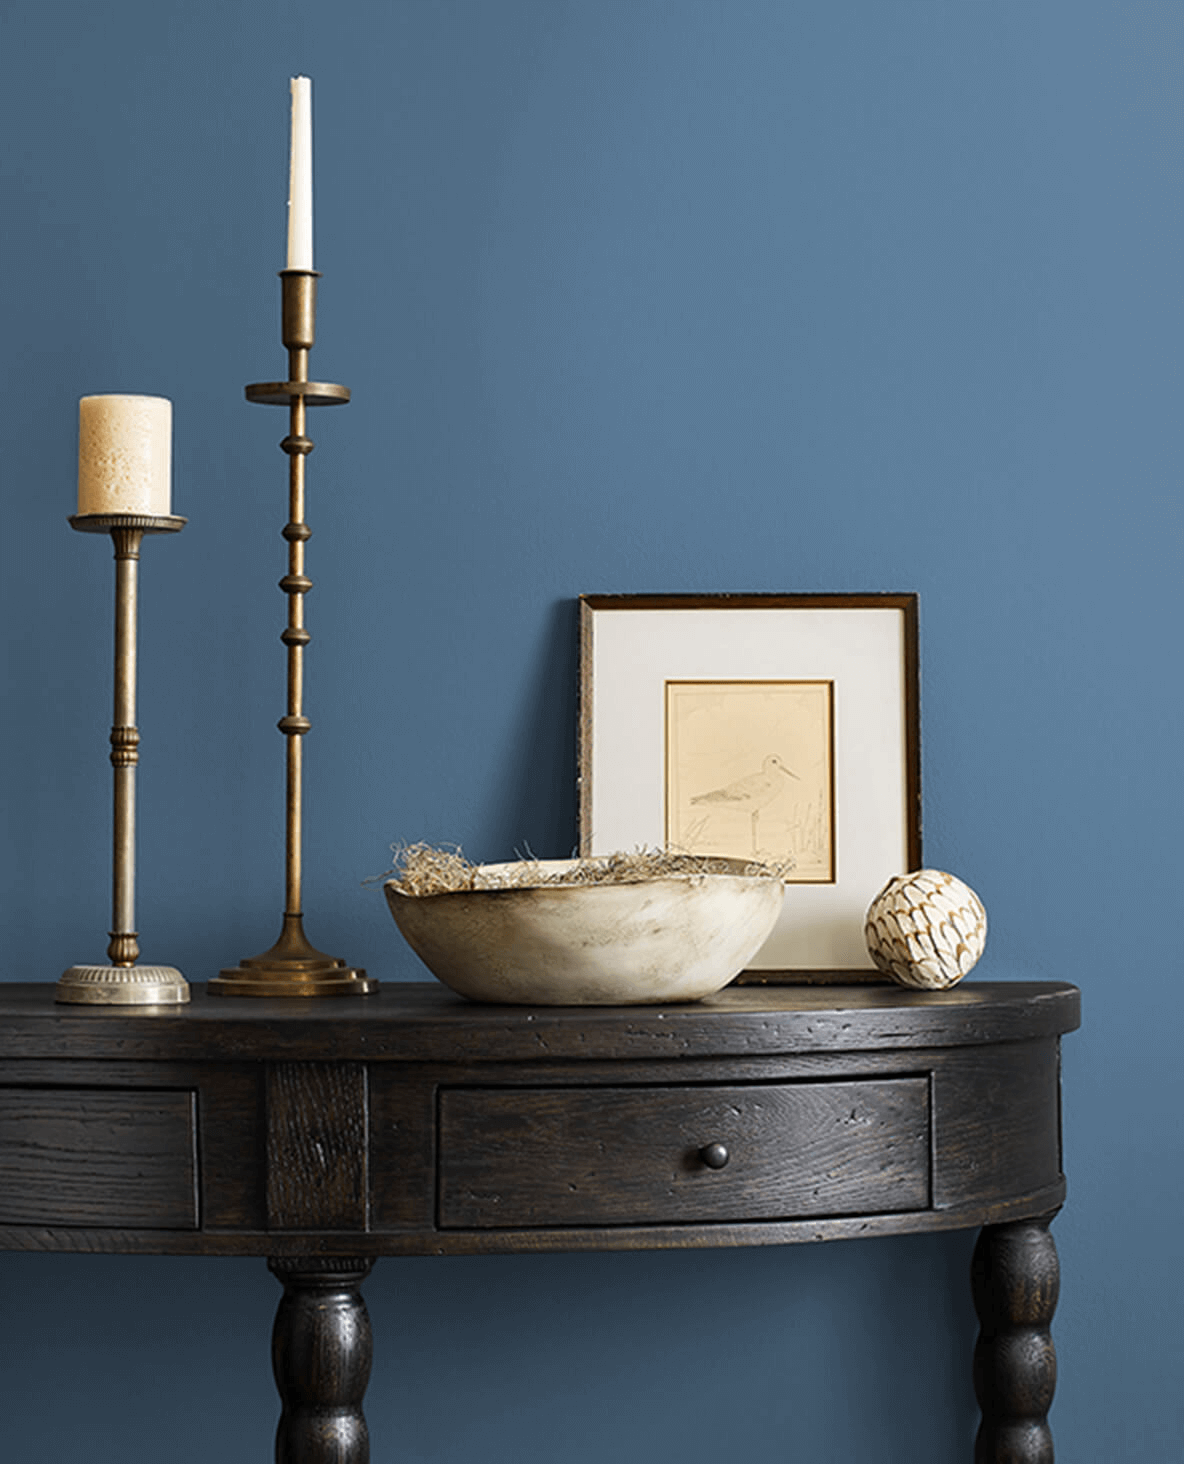 Sherwin Williams Pottery Barn Collection Denim color for custom sideboard   Blue wall colors Denim blue paint Dark paint colors